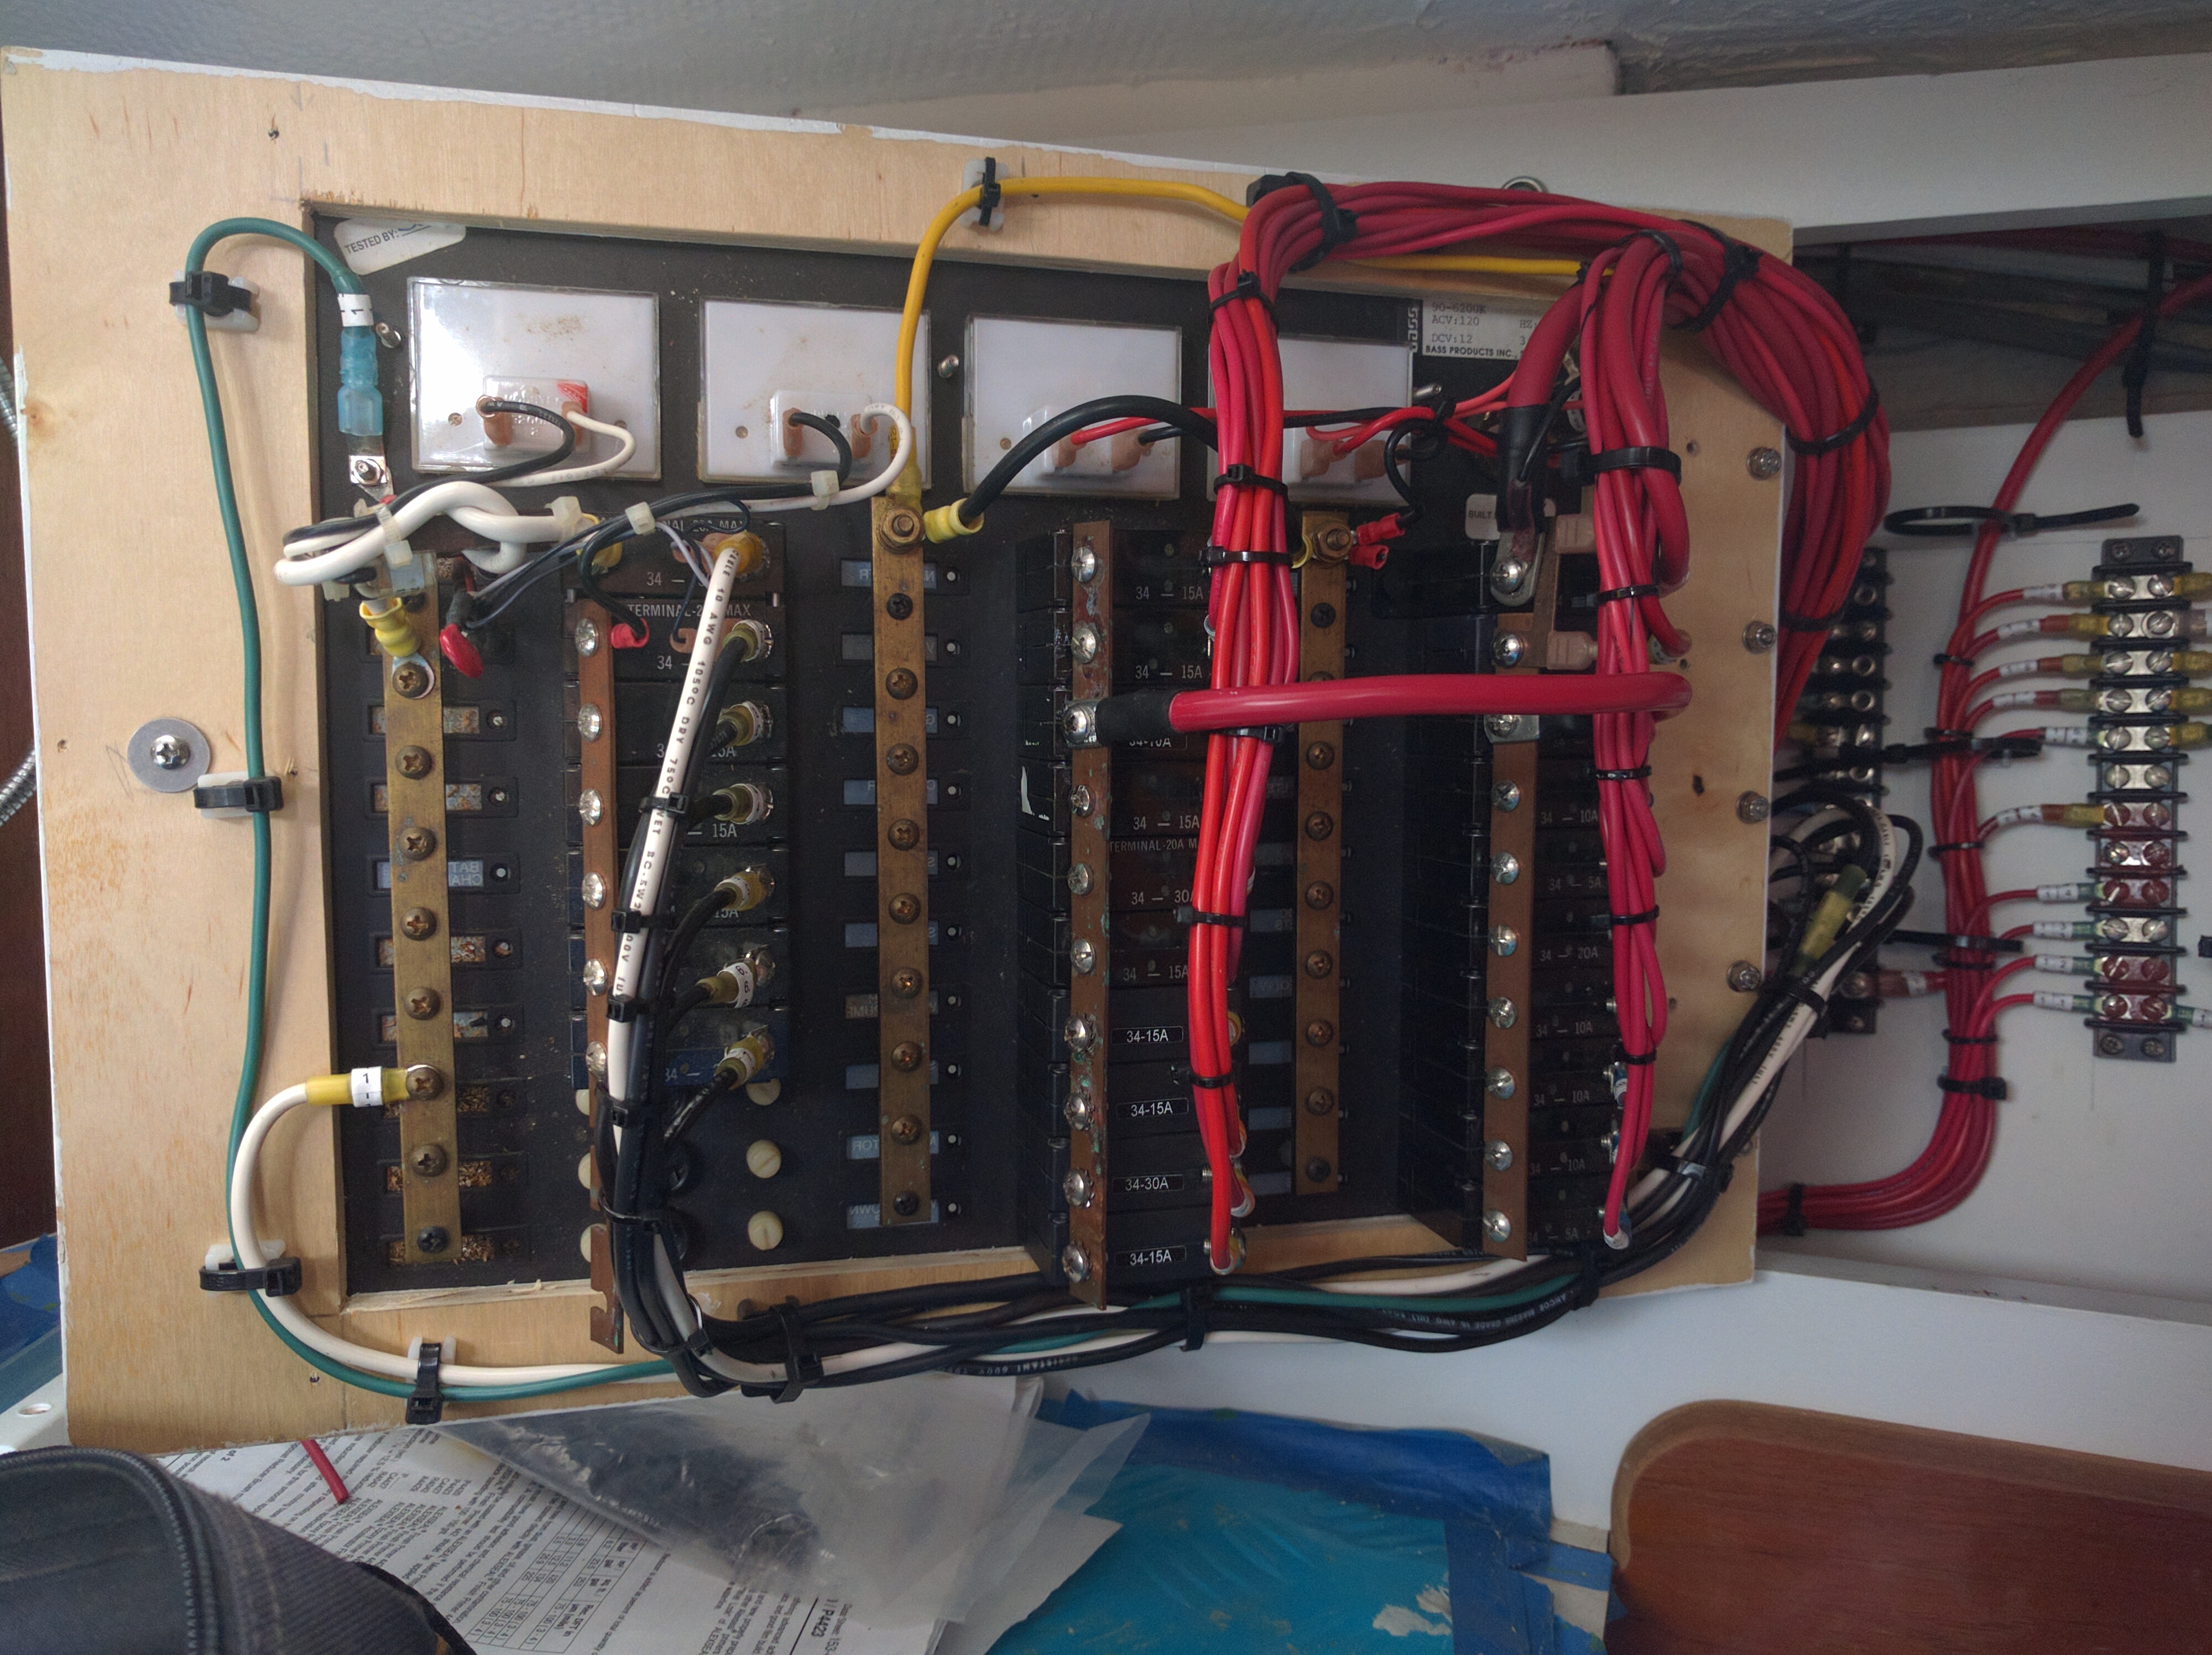 Backside electrical panel wiring completed